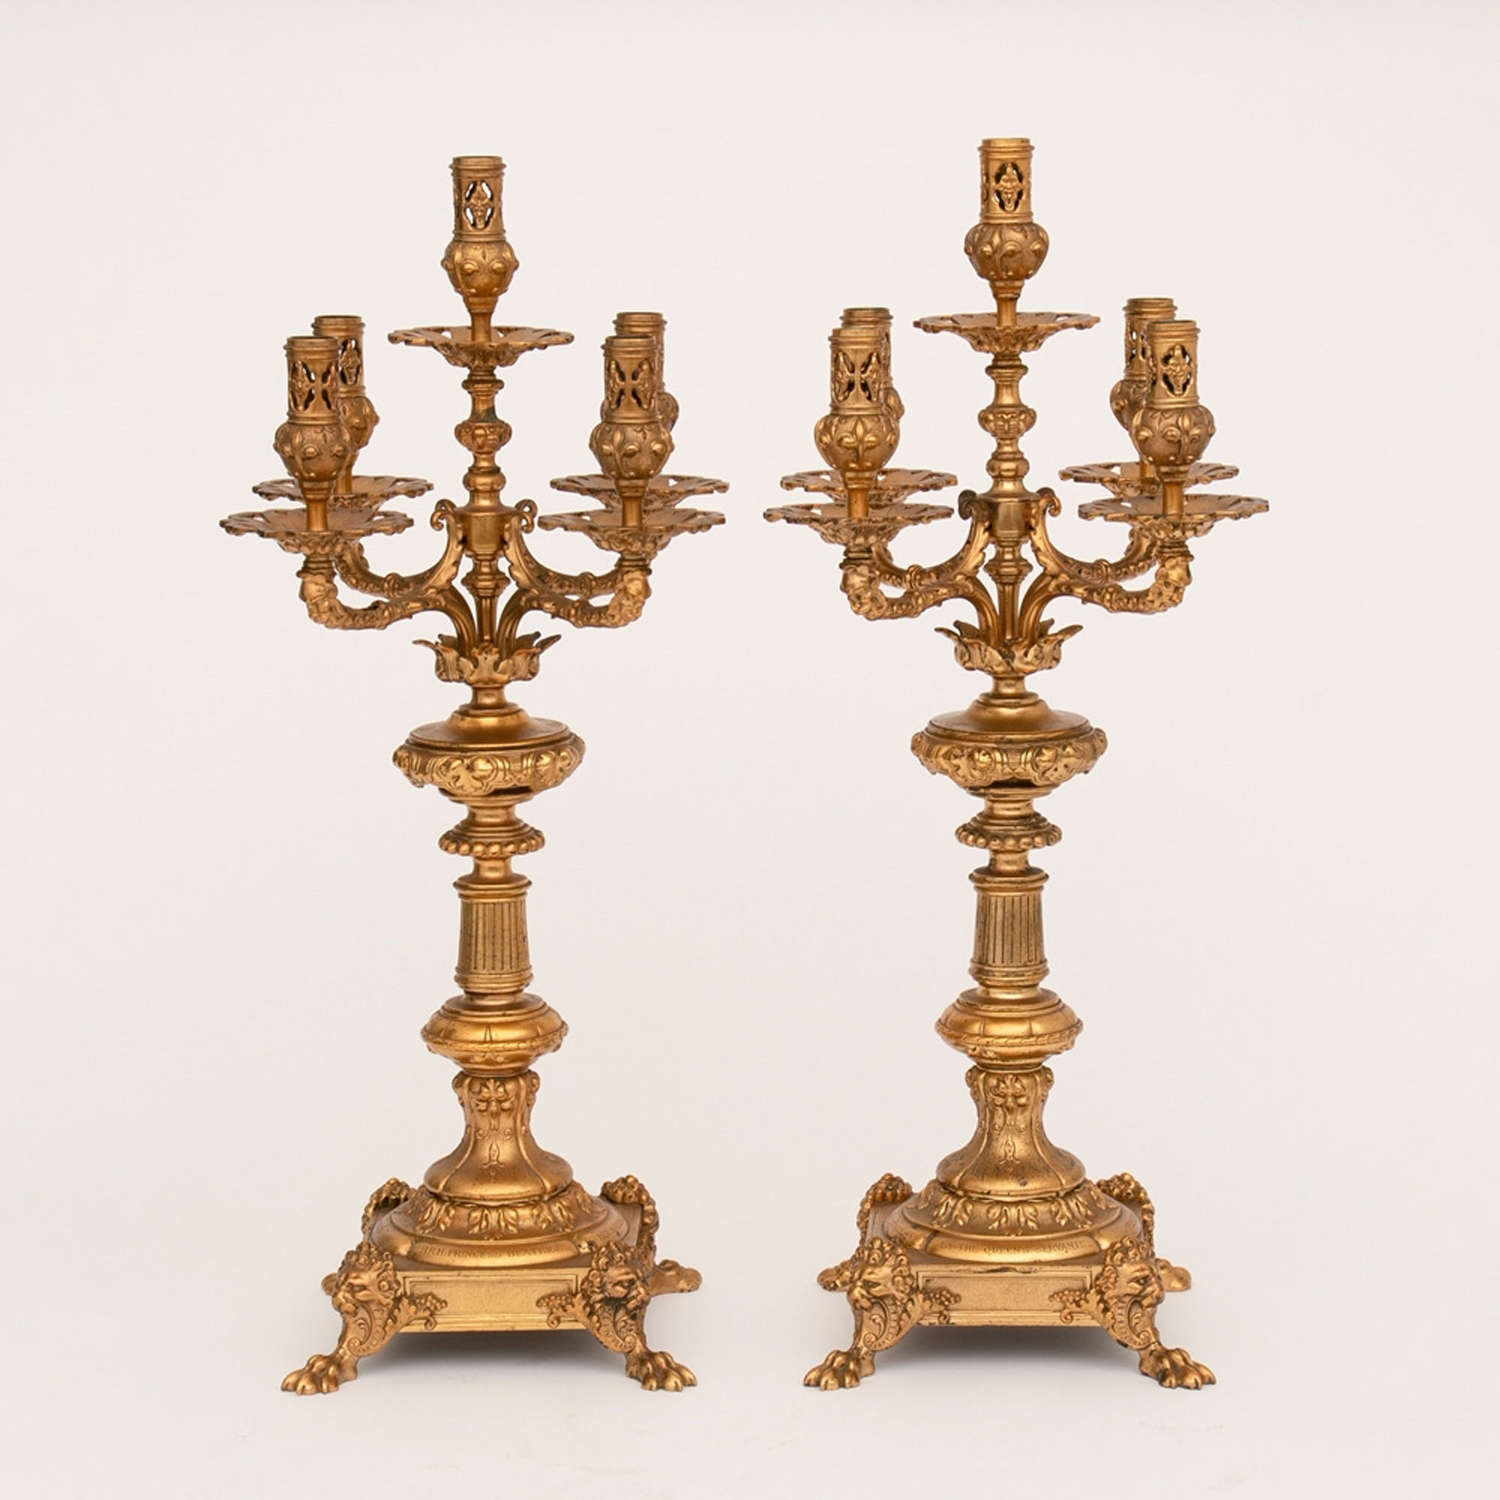 A pair of Victorian Candelabras Princess Beatrice in 1885